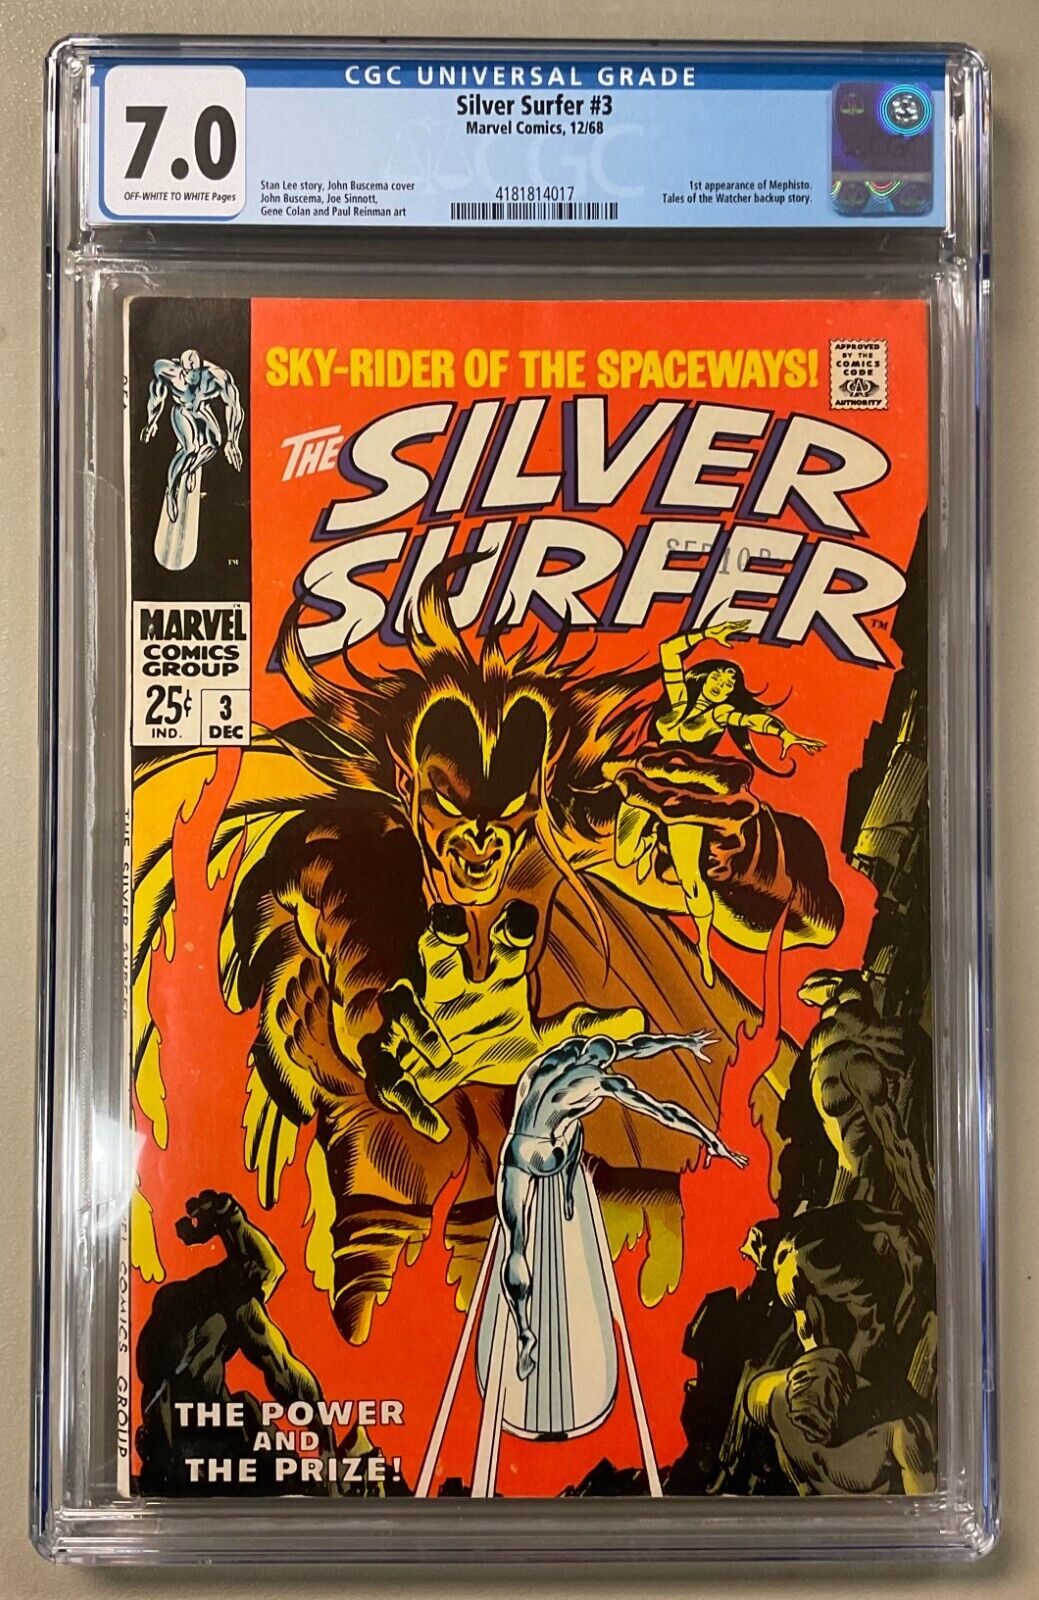 The Silver Surfer #3 7.0 CGC